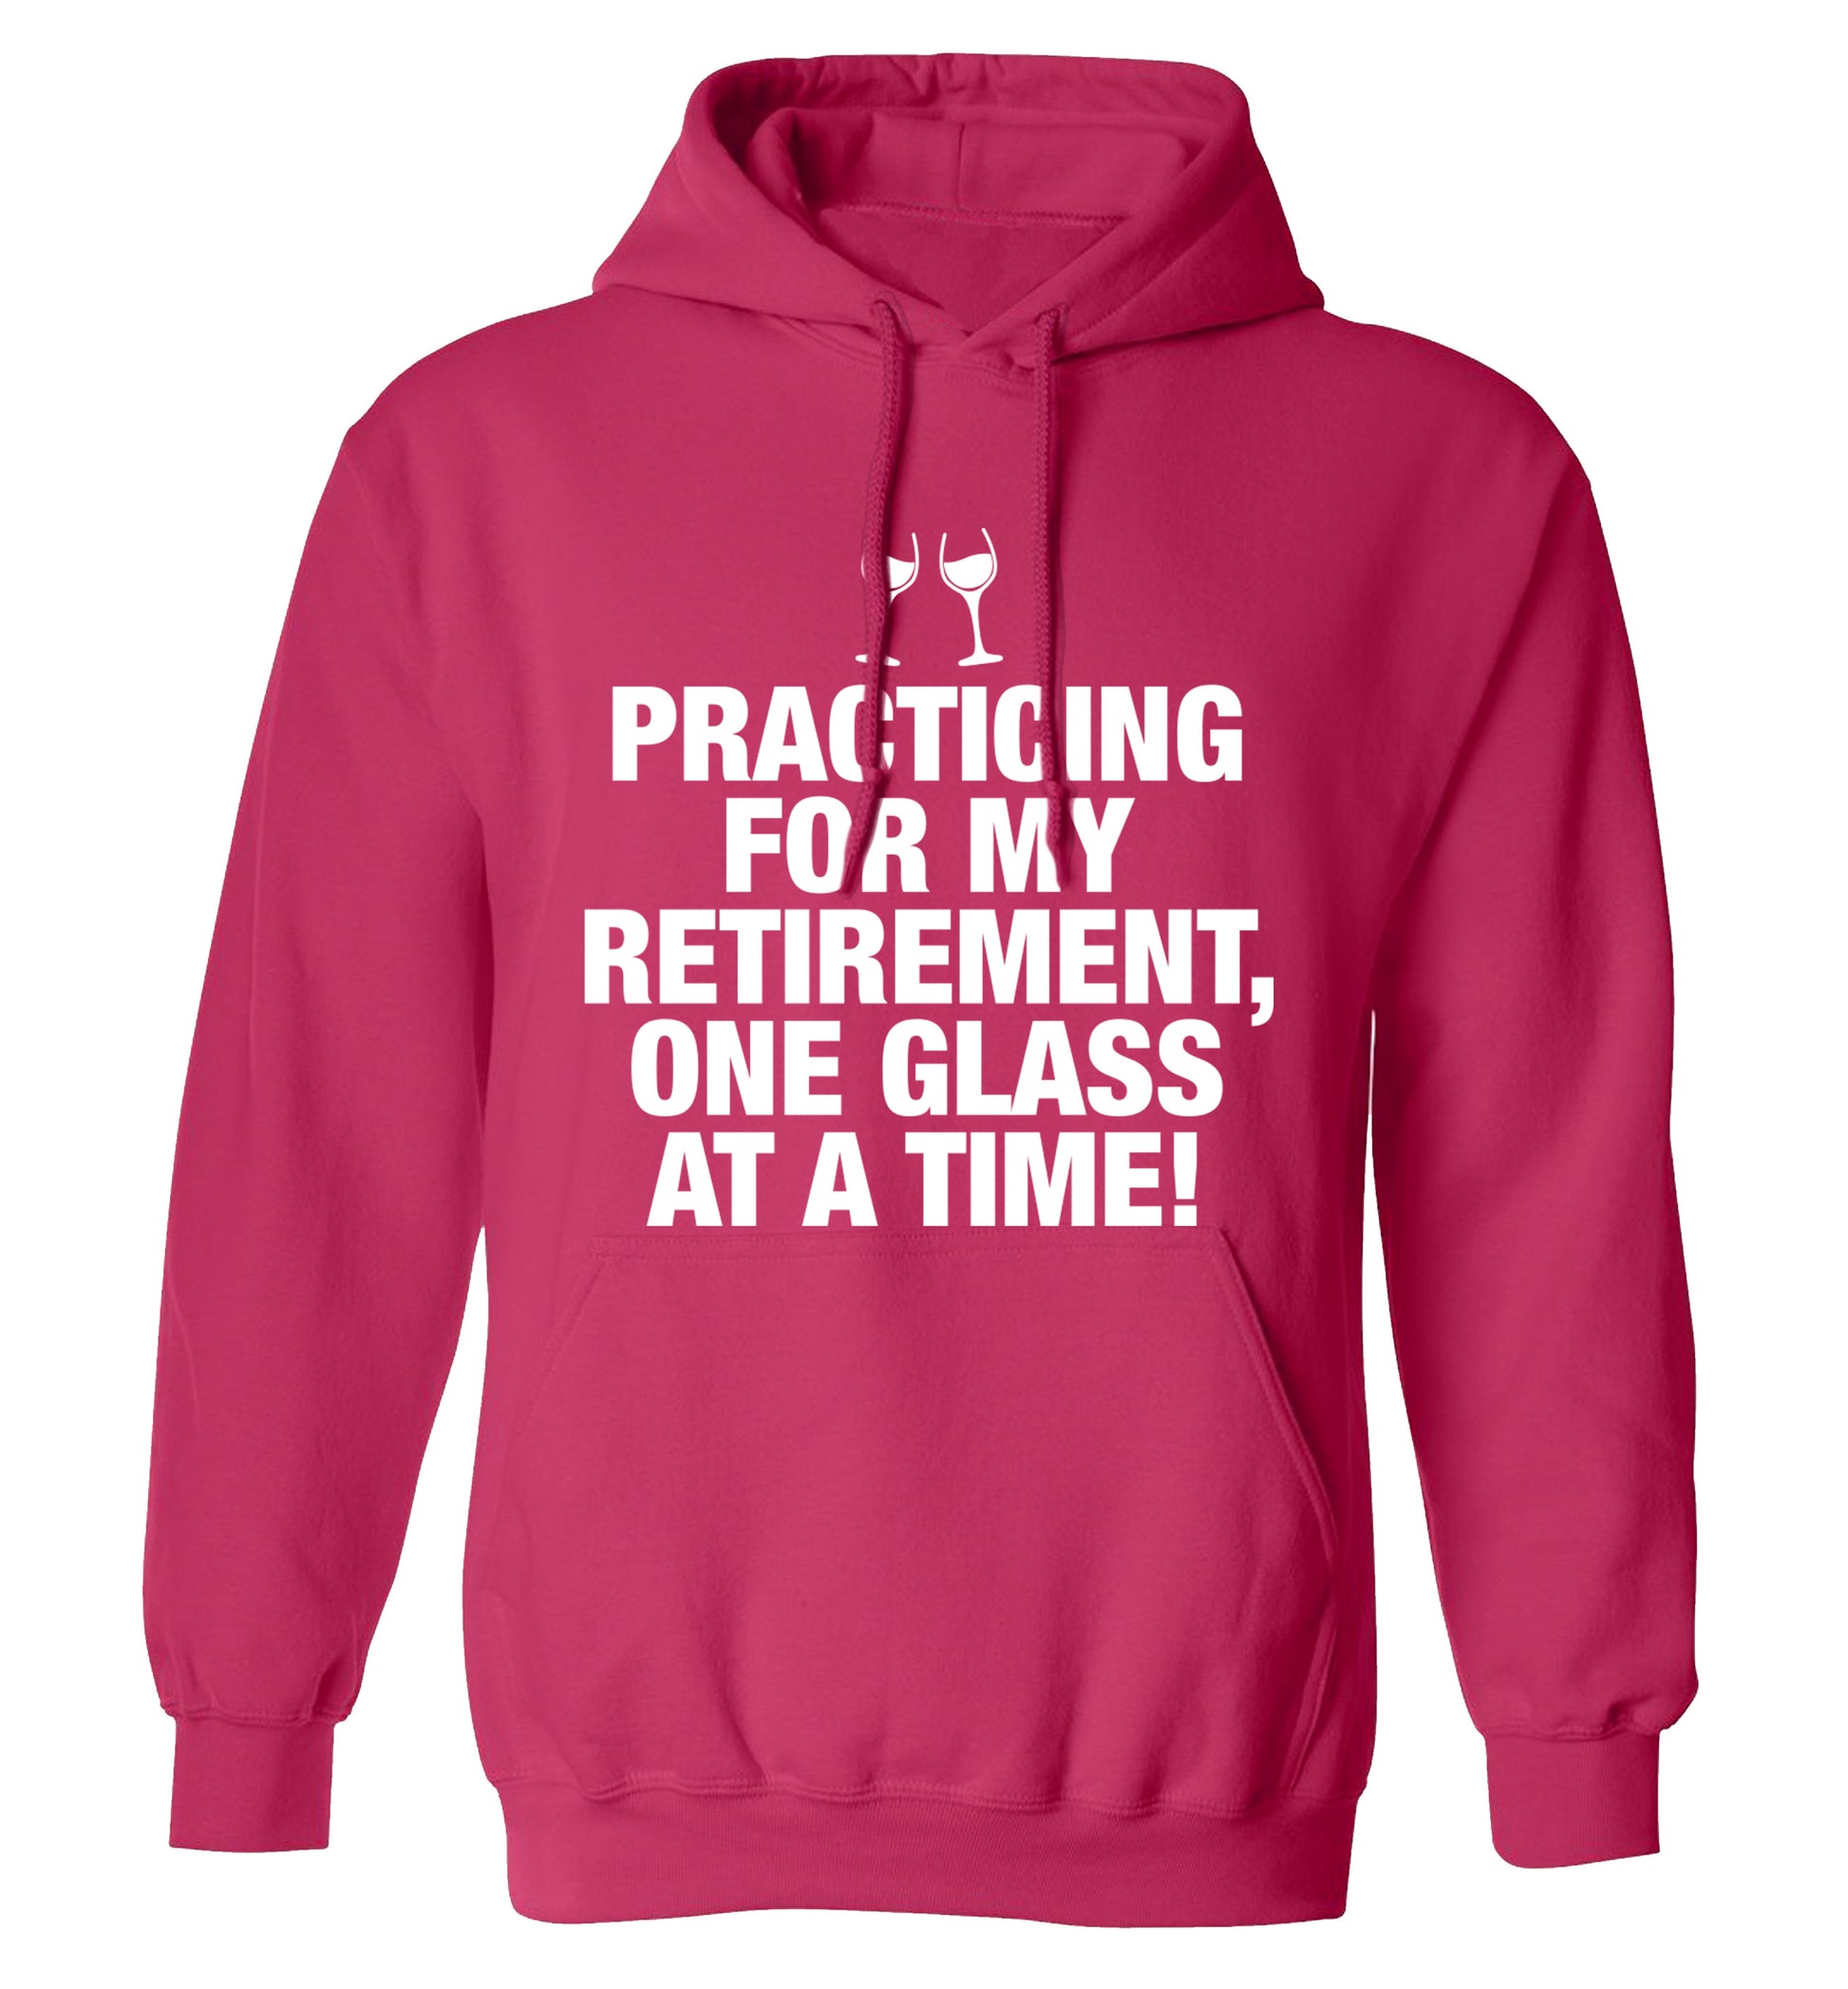 Practicing my retirement one glass at a time adults unisex pink hoodie 2XL